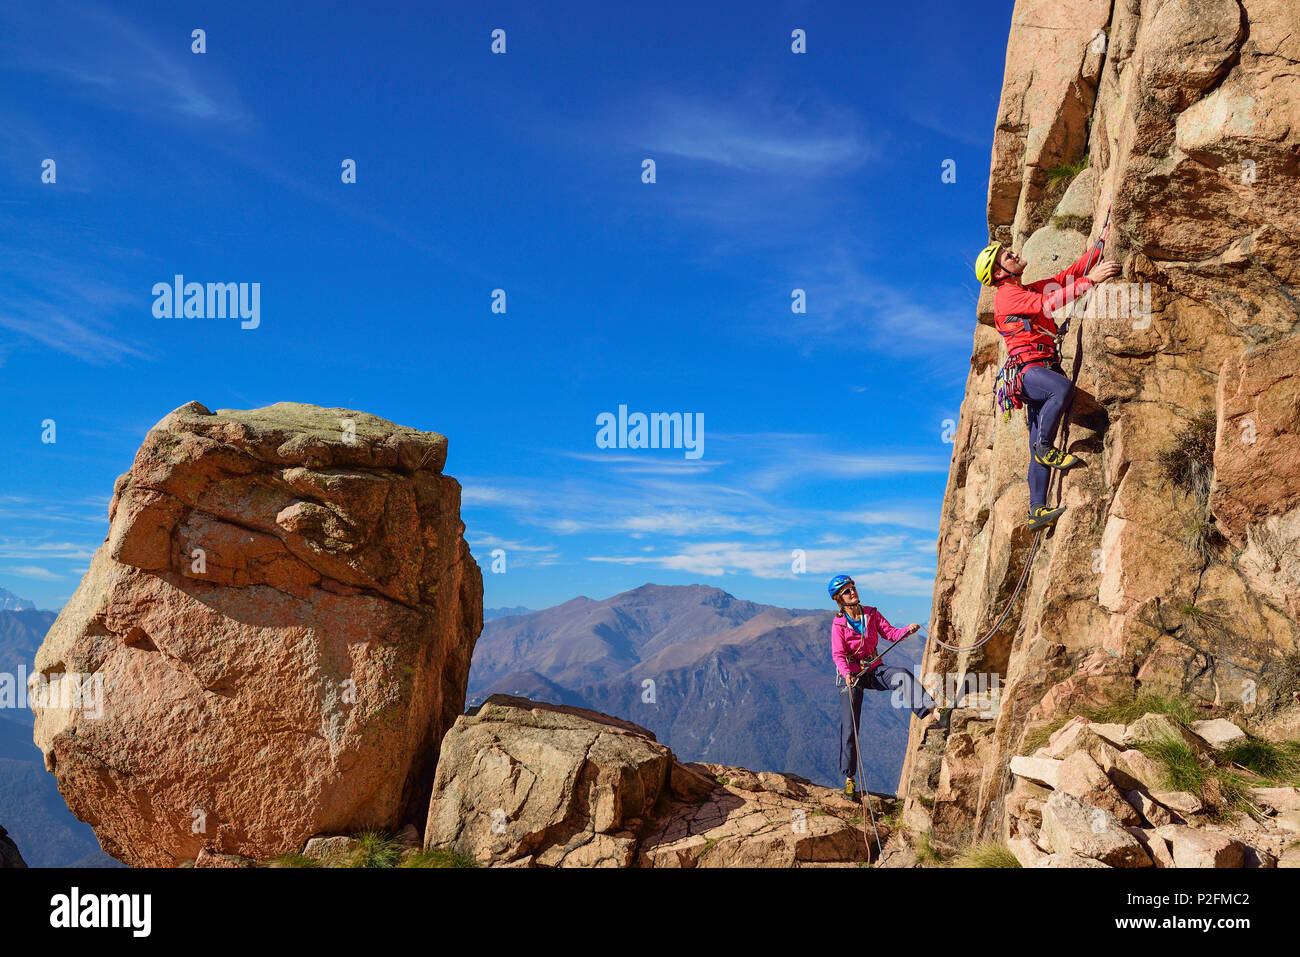 Man climbing on red Granite rock is being belayed by woman, Mottarone, Piedmont, Italy Stock Photo